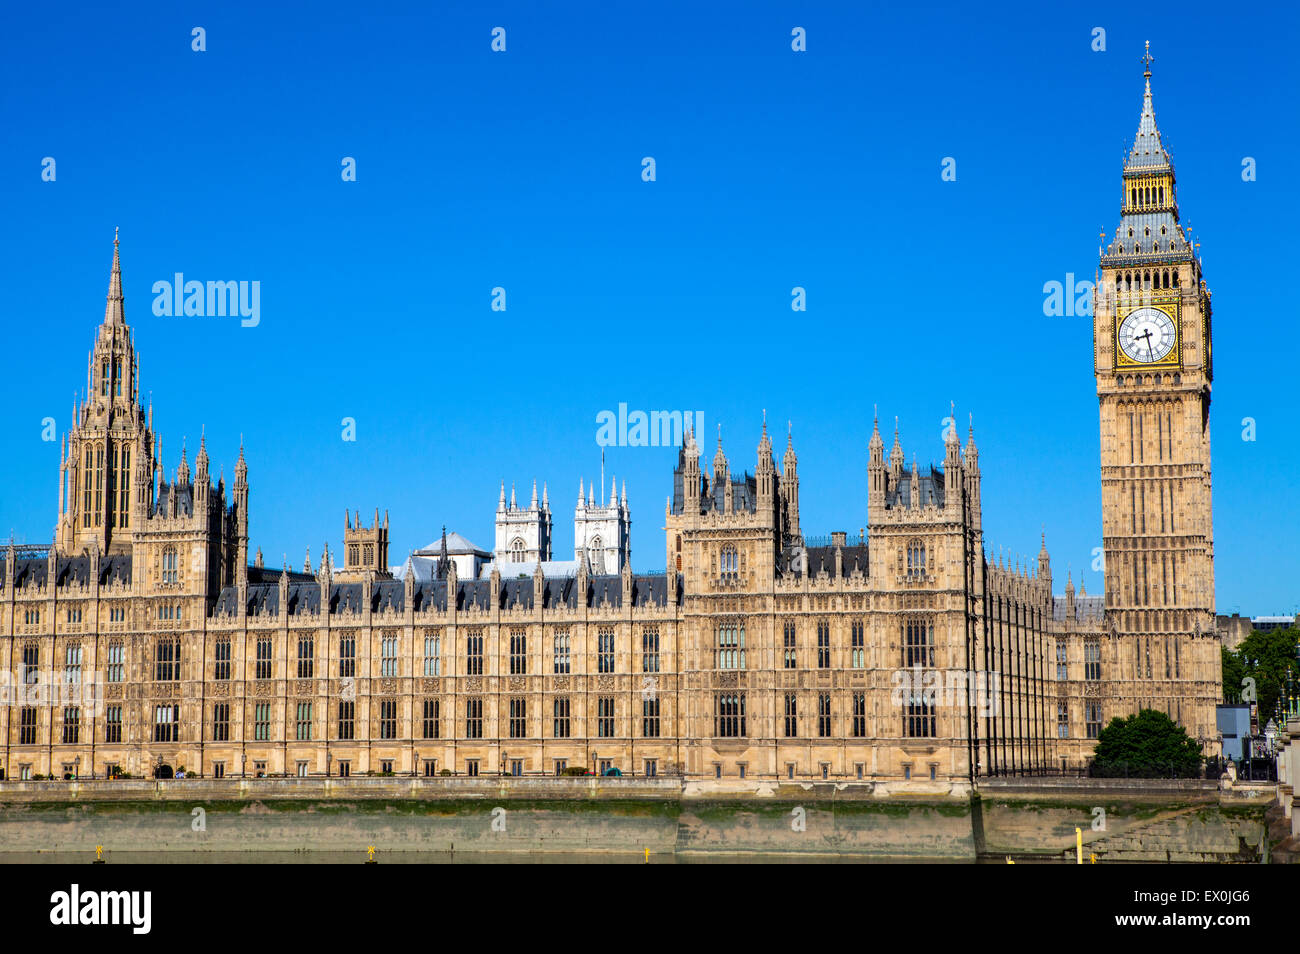 A view of the magnificent Palace of Westminster in London.  The towers of Westminster Abbey can be seen in the distance. Stock Photo